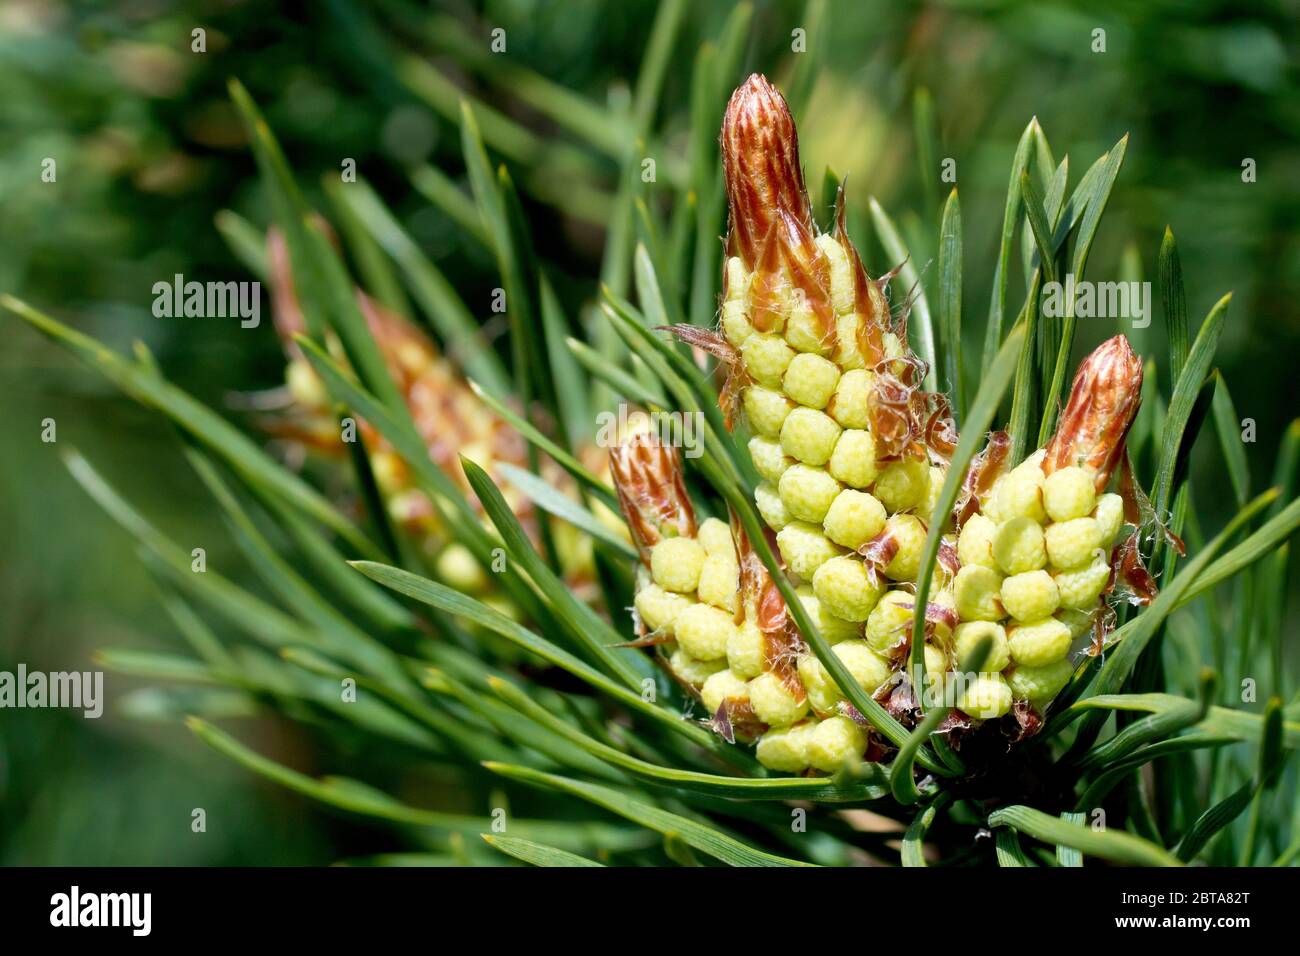 Scot's Pine (pinus sylvestris), close up showing the male flowers beginning to bloom at the end of a branch. Stock Photo